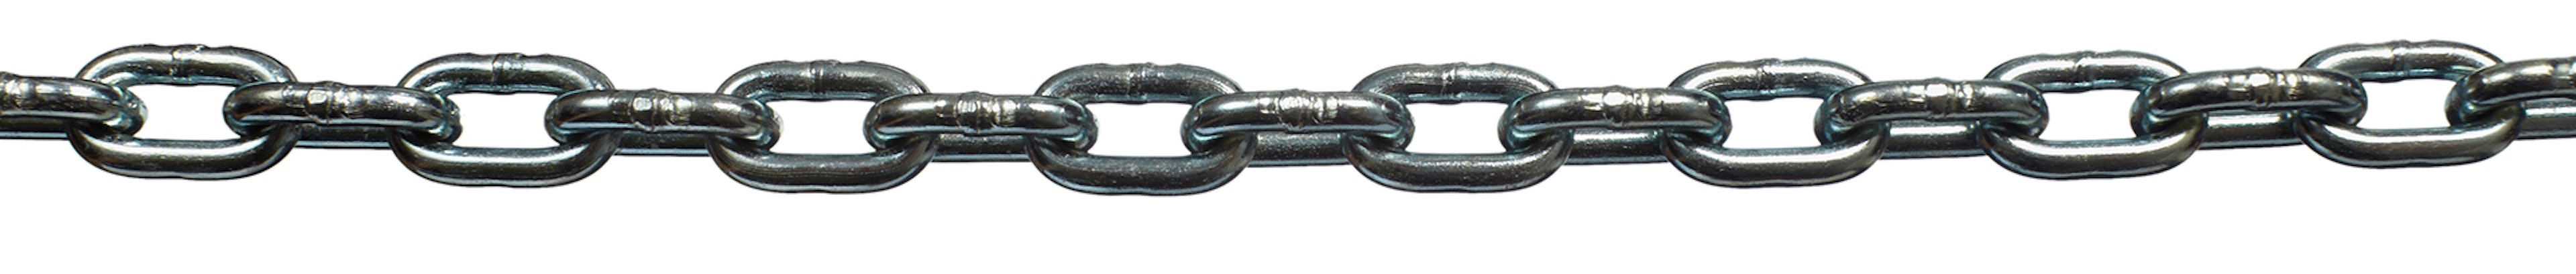 secure 101 chain